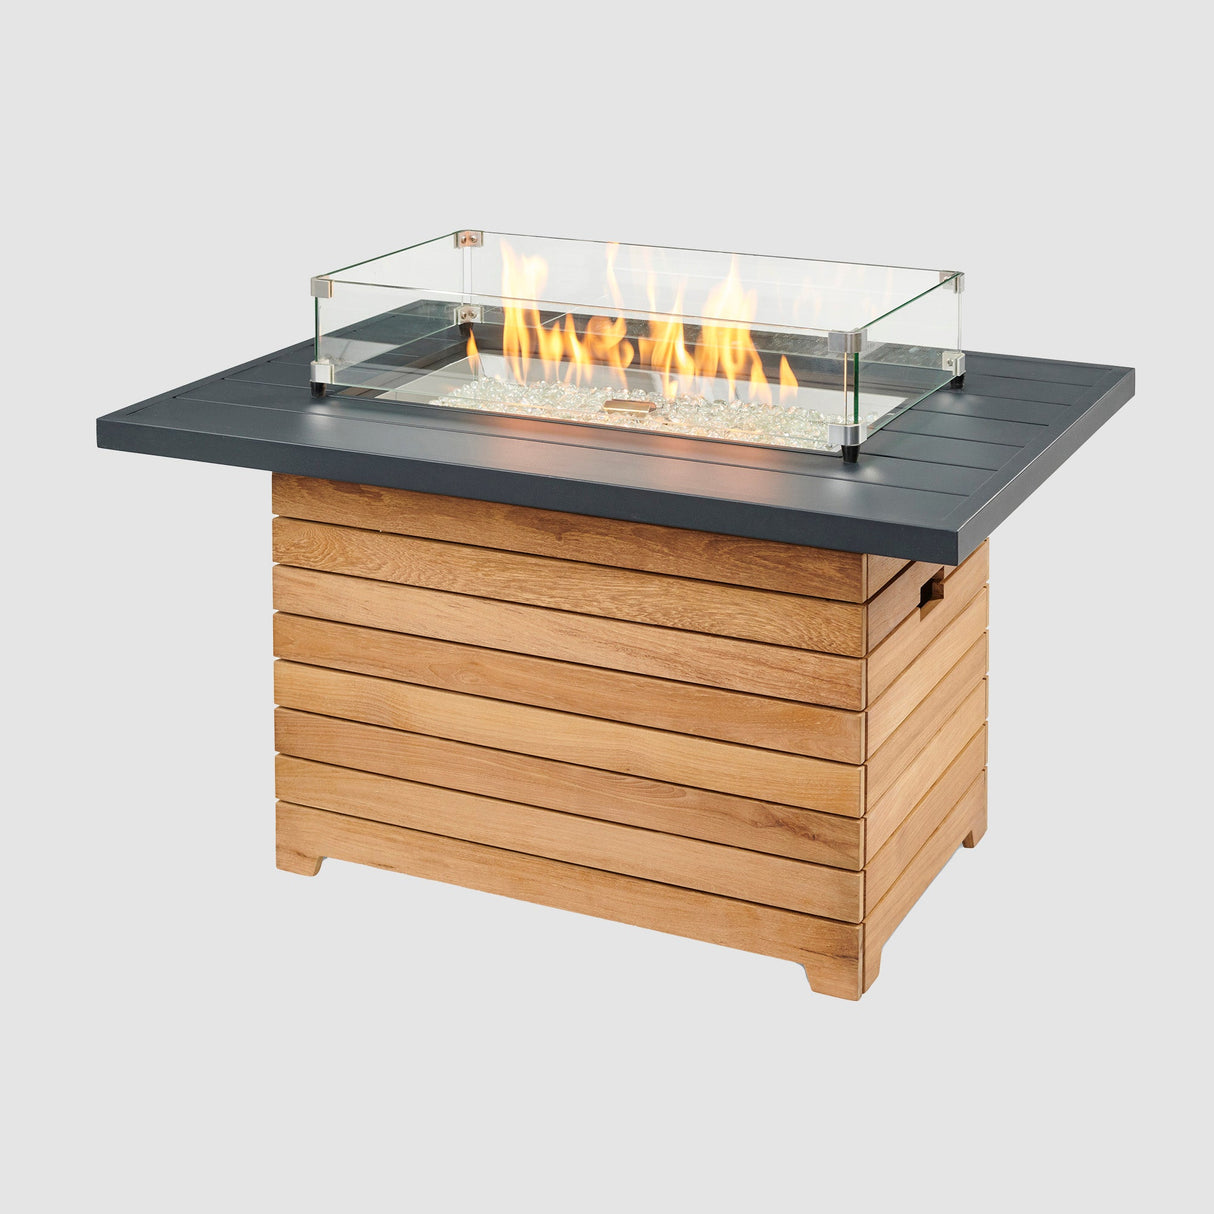 A glass wind guard placed on the top of a Darien Rectangular Gas Fire Pit Table with an Aluminum top